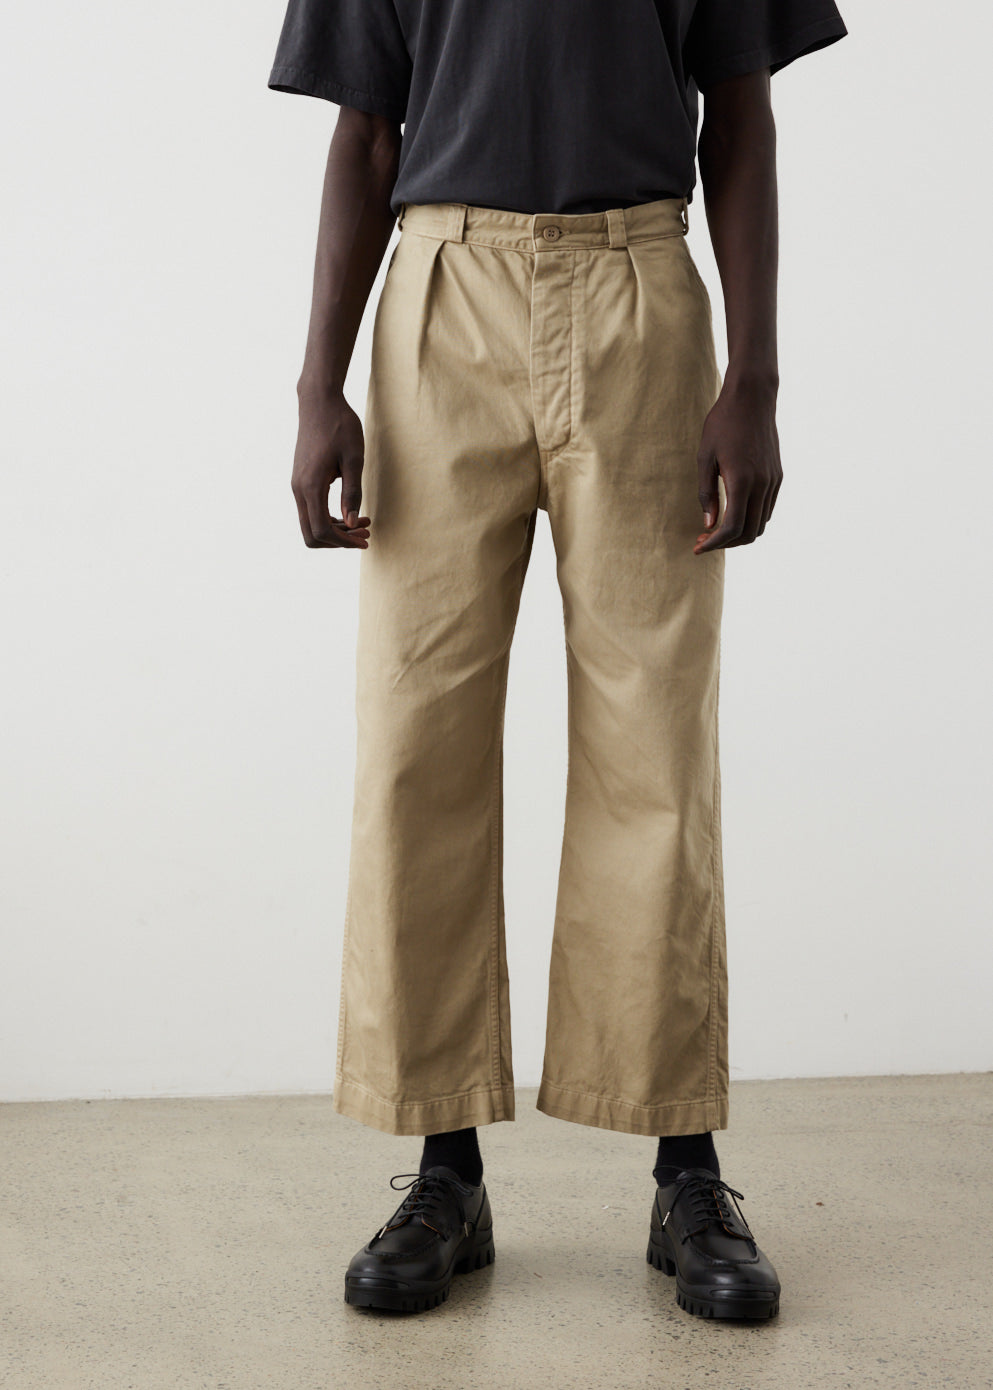 M-52 French Army Trouser